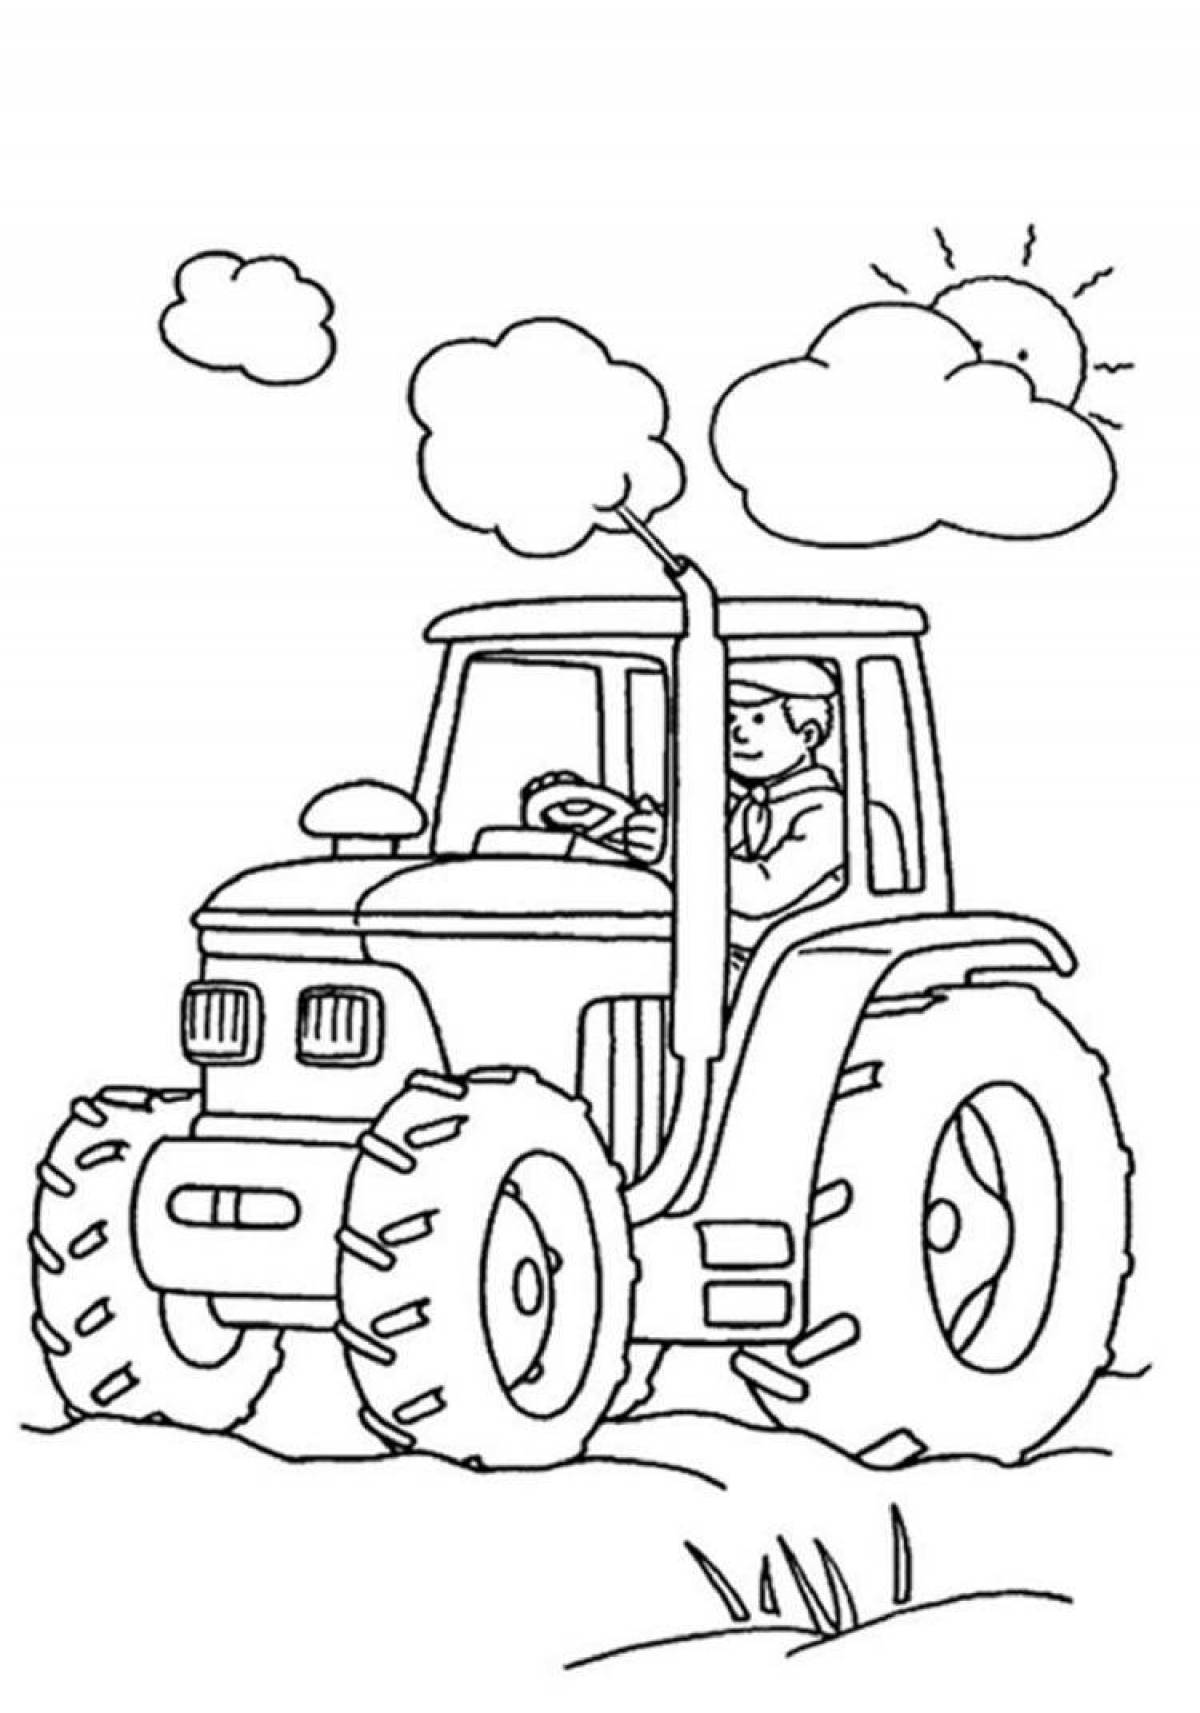 Bright t 40 tractor coloring page